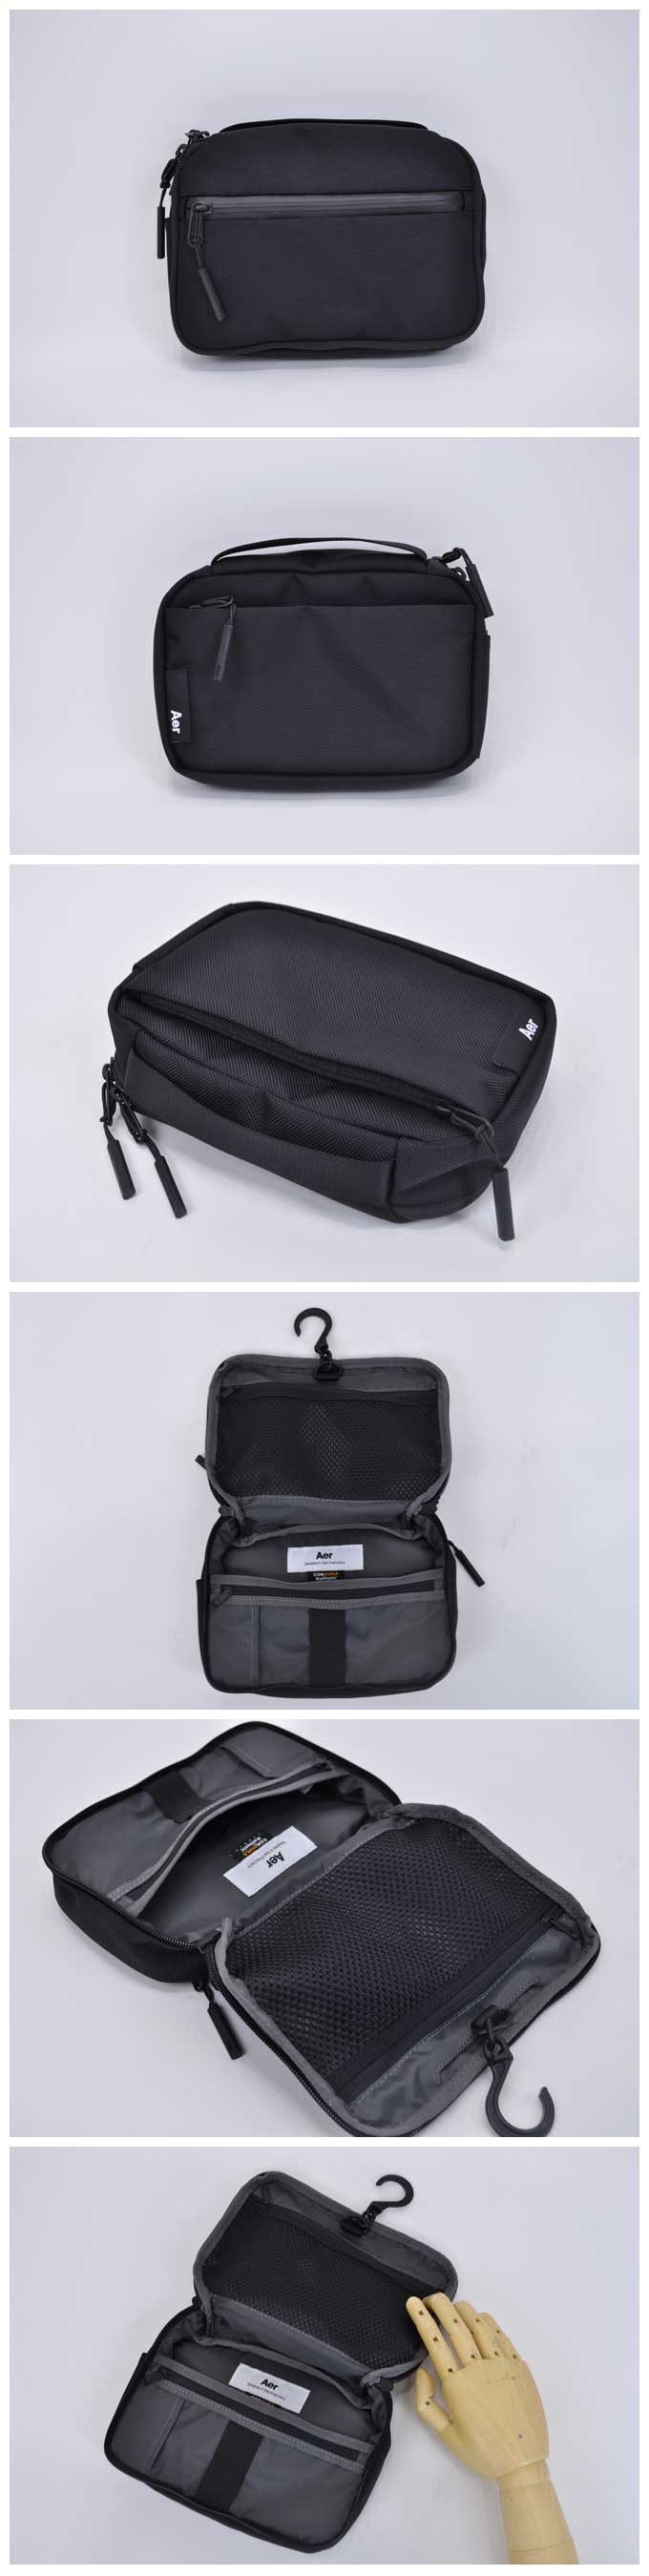 Aer Travel Kit（Travel Collection)